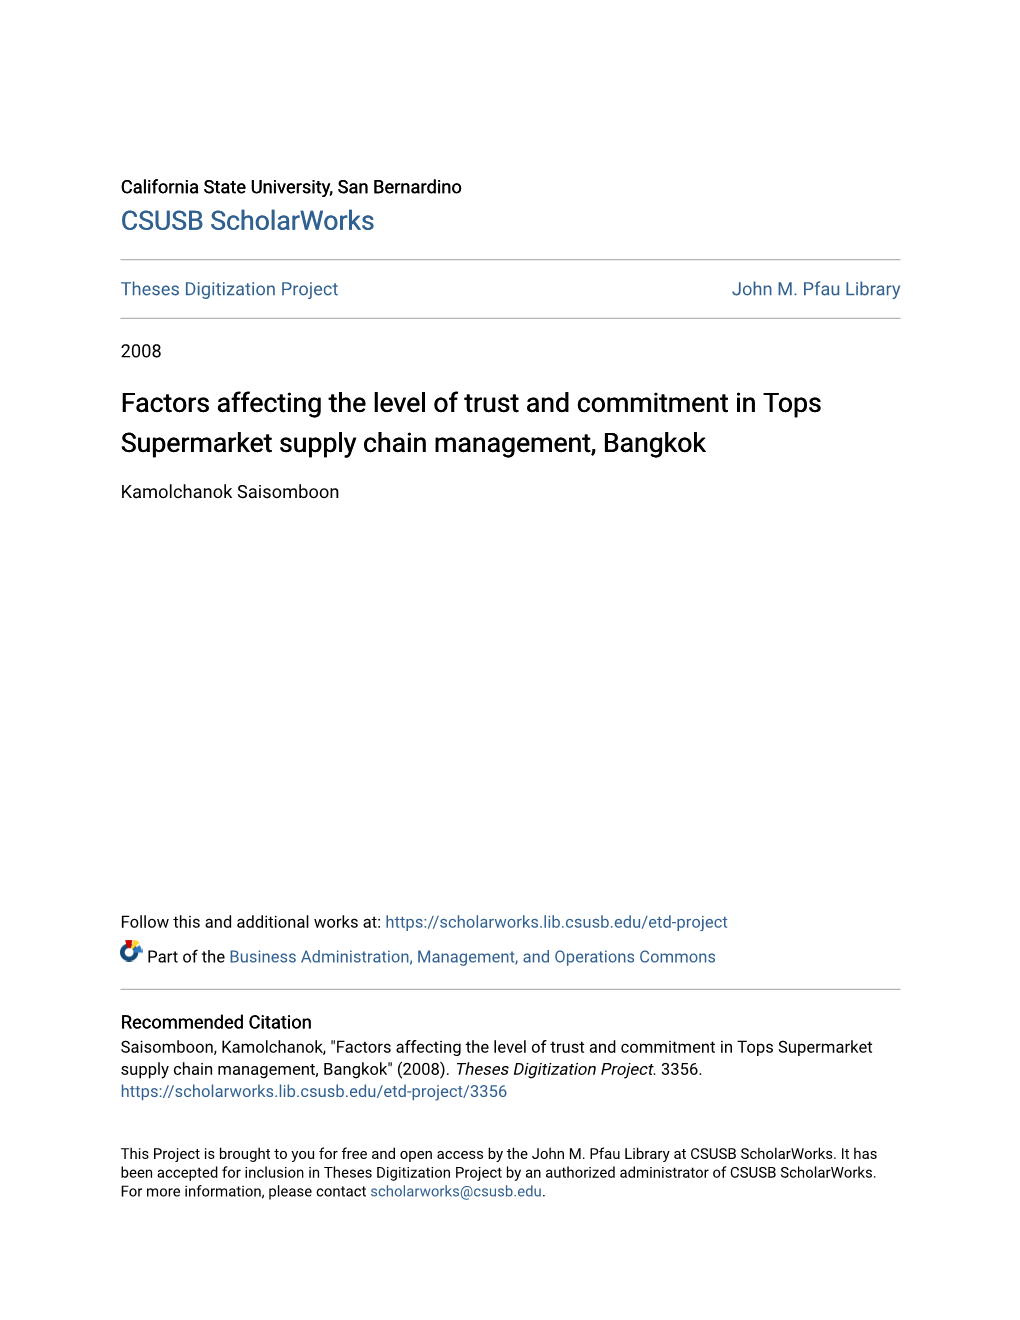 Factors Affecting the Level of Trust and Commitment in Tops Supermarket Supply Chain Management, Bangkok